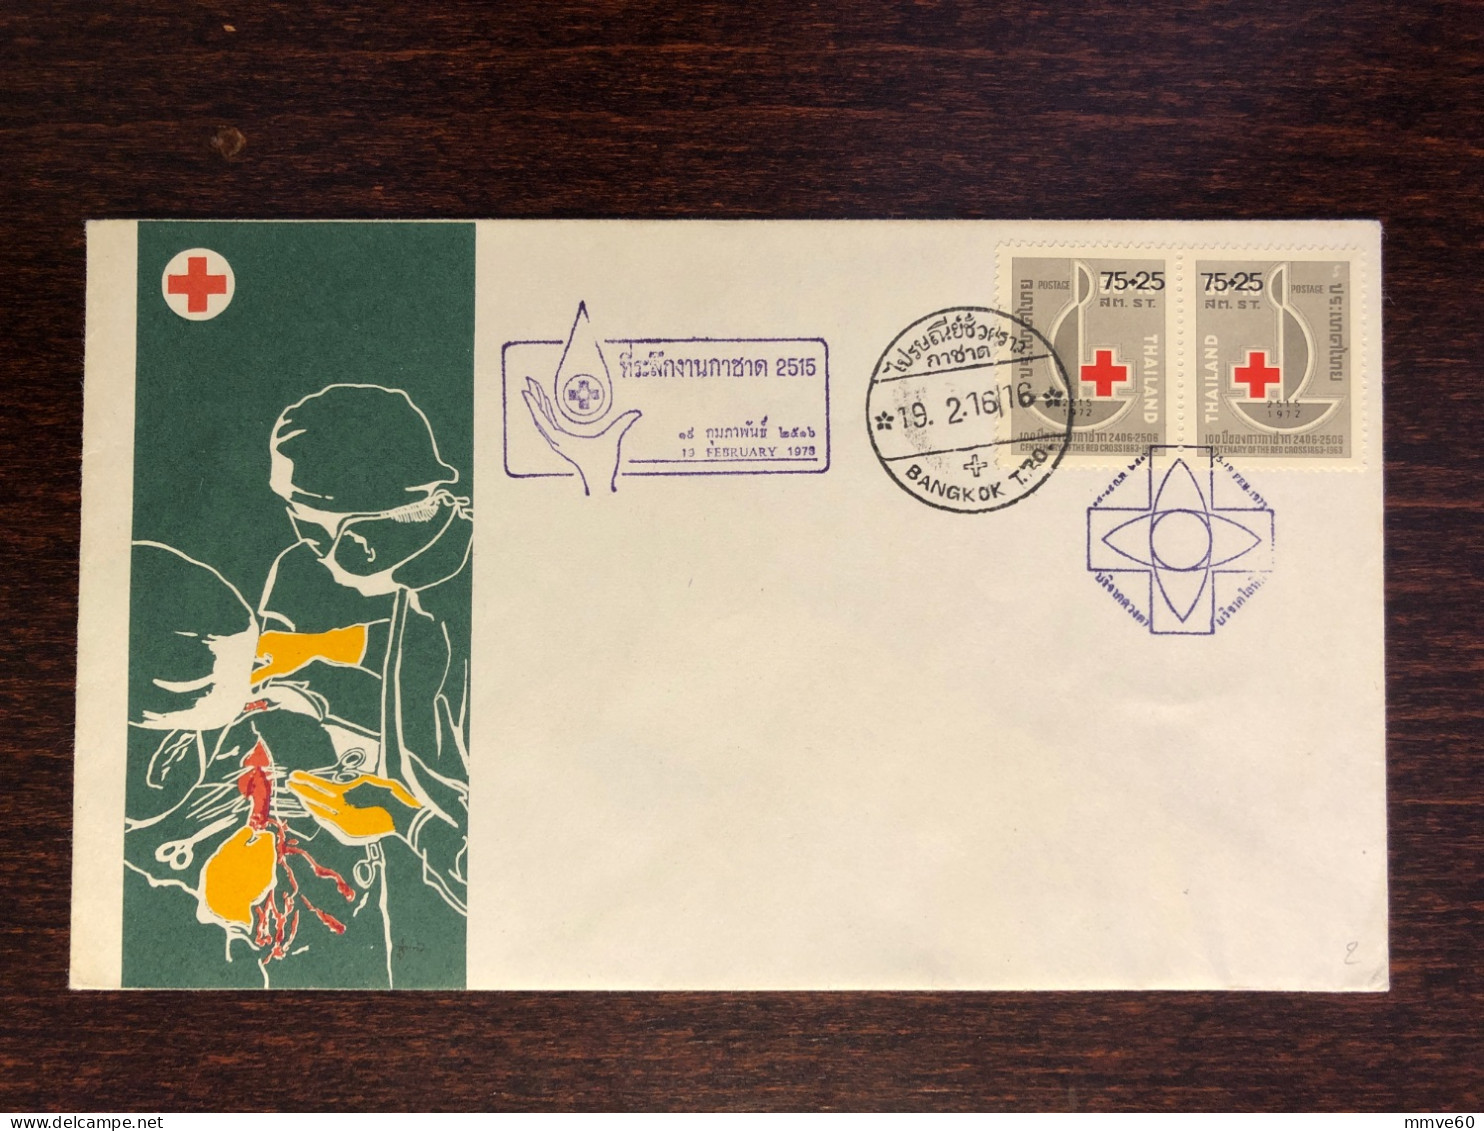 THAILAND FDC COVER WITH OVERPRINTS 1973 YEAR RED CROSS HEALTH MEDICINE STAMPS - Thaïlande